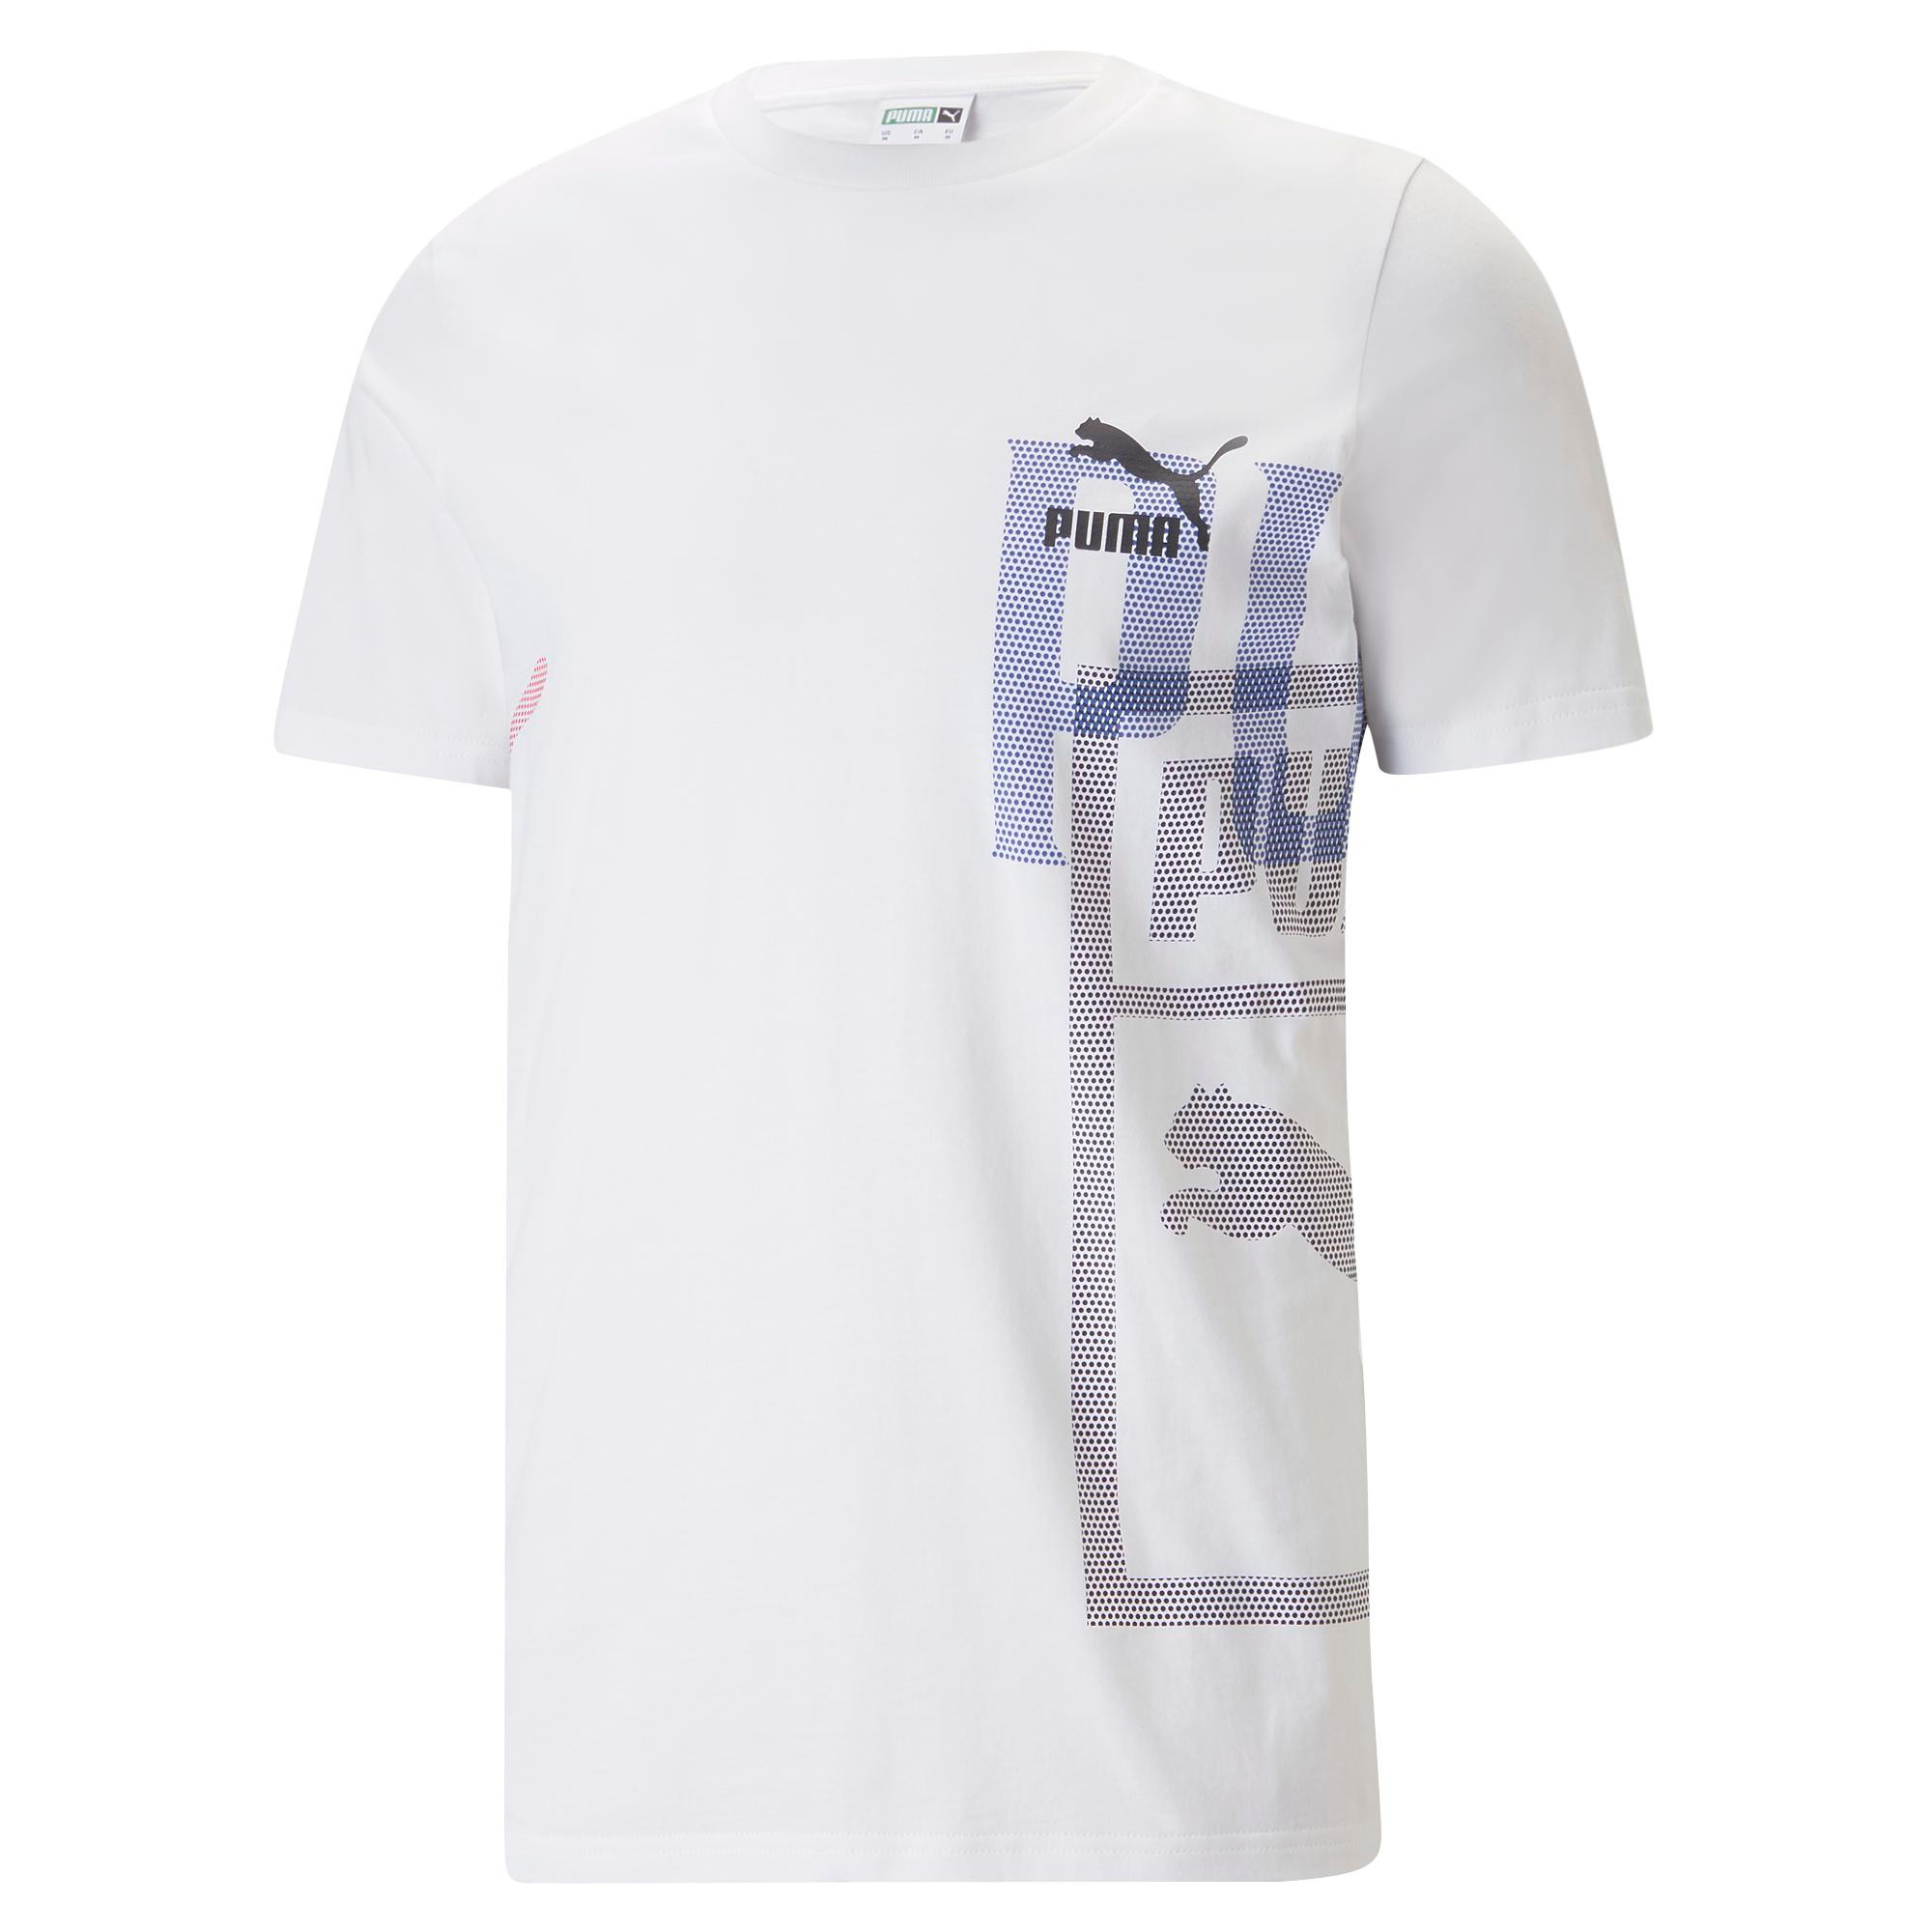 Puma - T-shirt in cotone con logo, Bianco, large image number 0